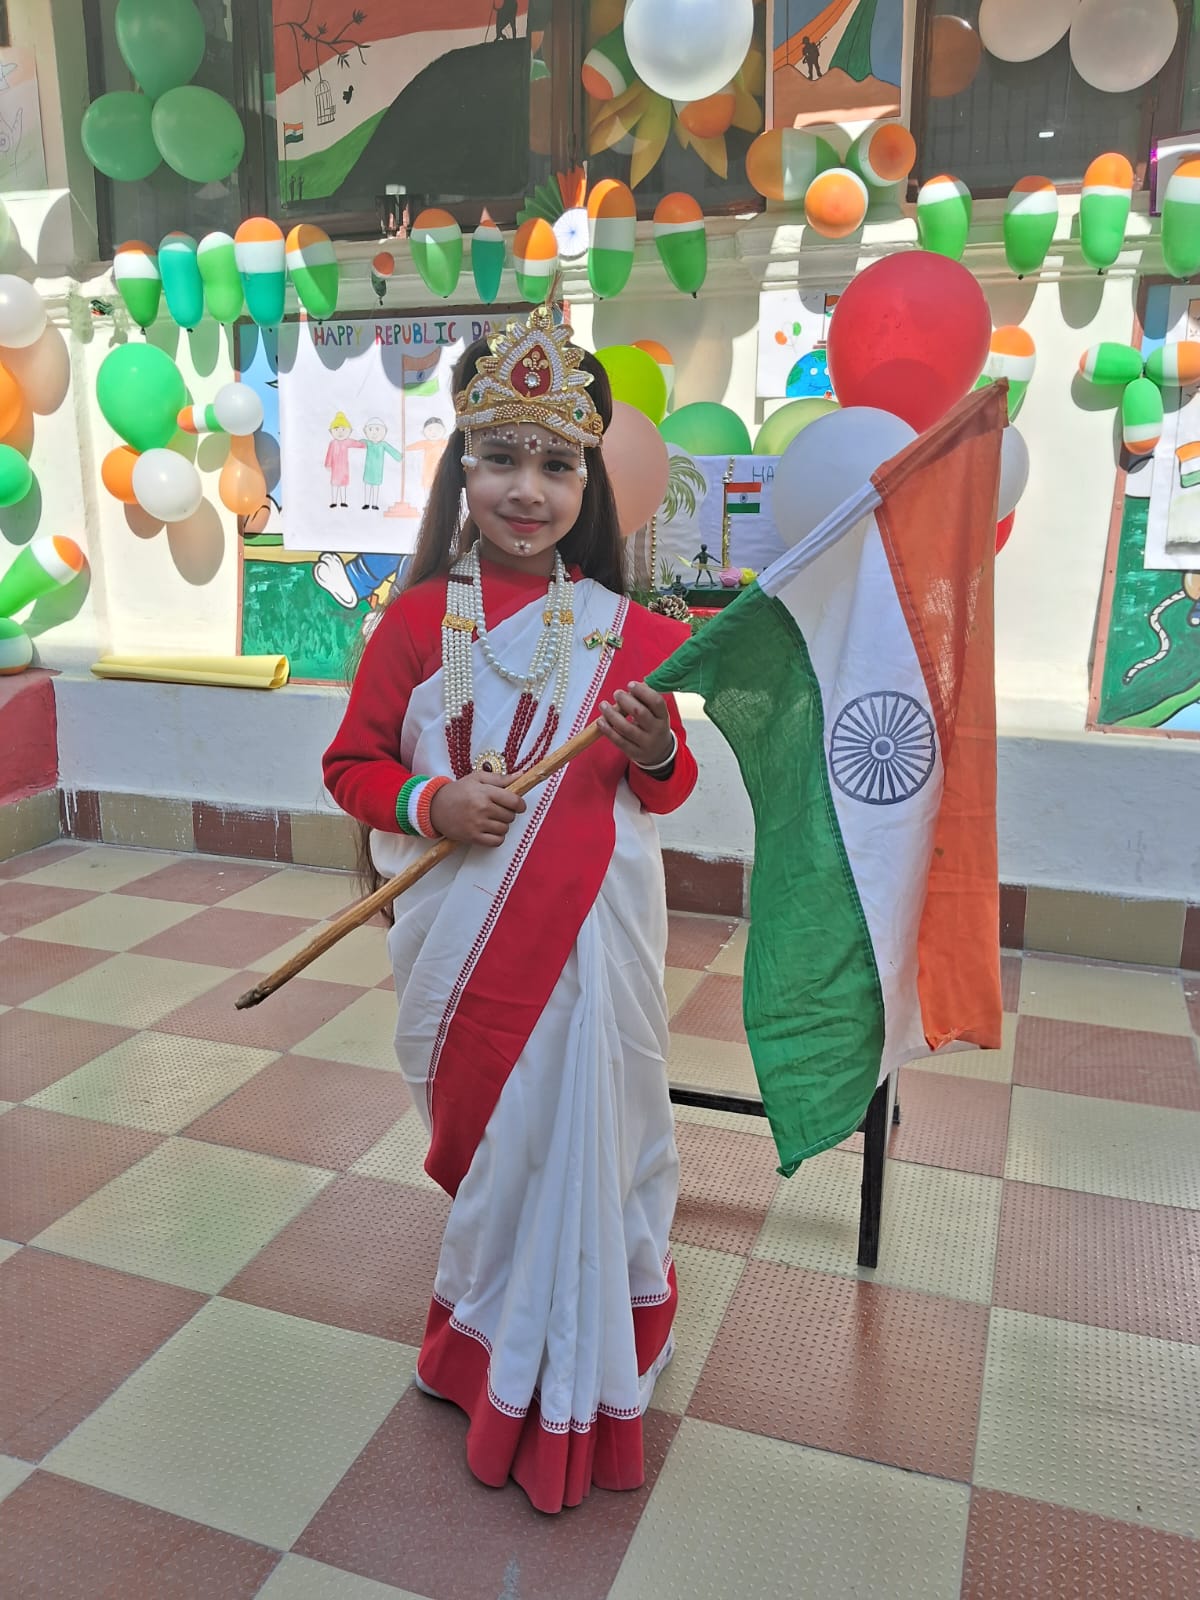 Republic Day Celebrations kick start with the little ones at GNA